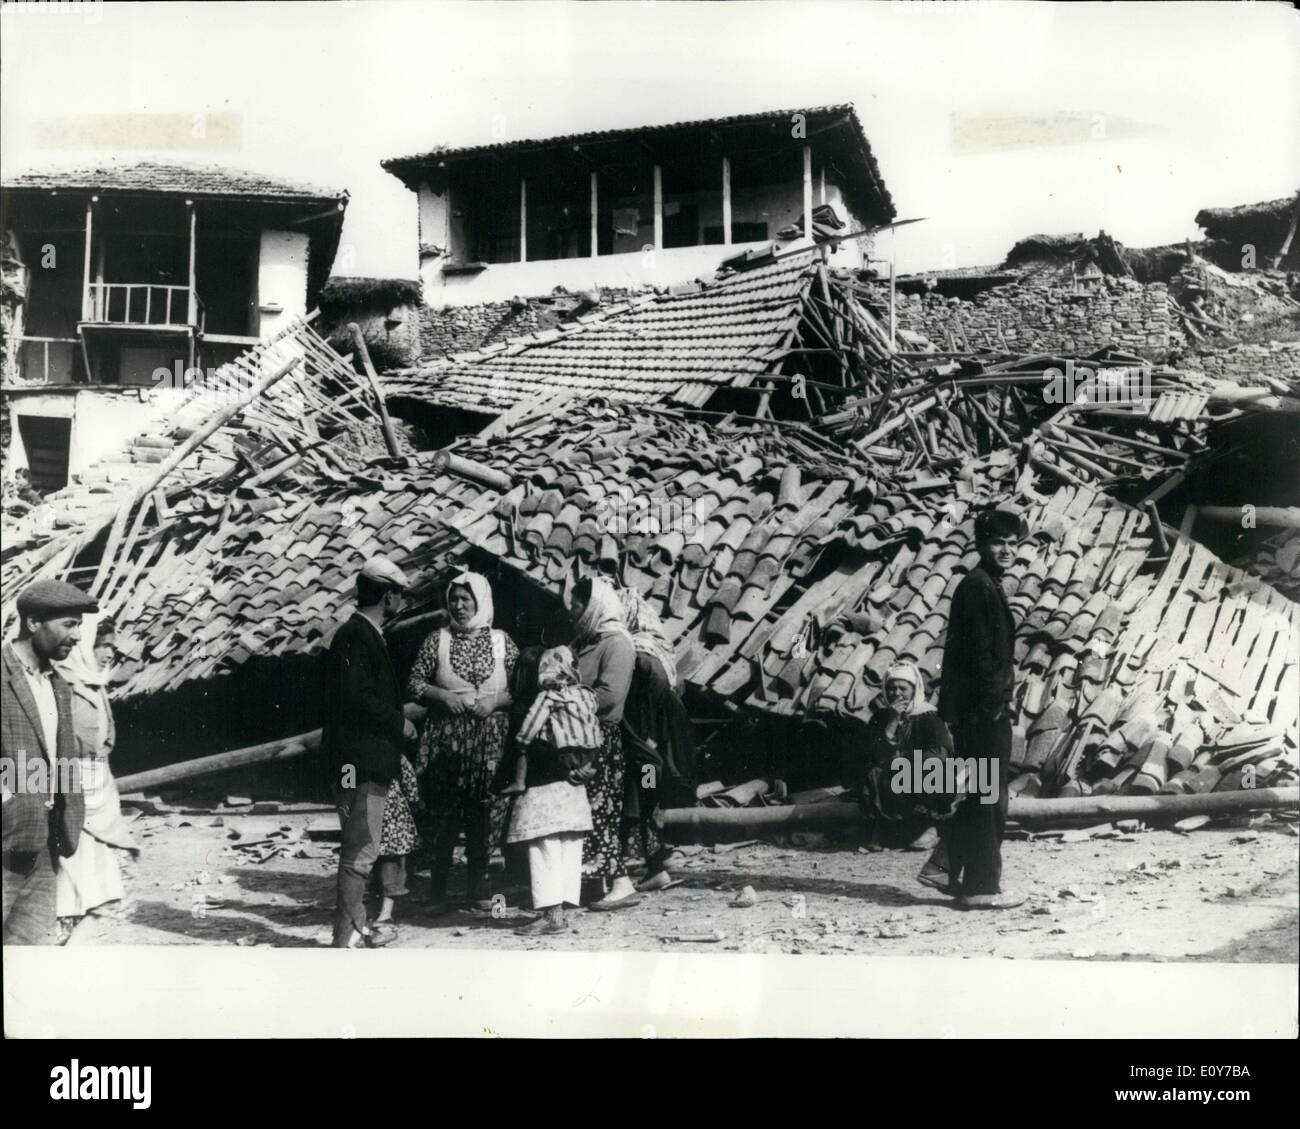 Mar. 31, 1969 - March 31st, 1969 53 die in Turkish earthquake. 53 people were reported dead and more than 300 injured in an earthquake which hit Western Anatolia, Turkey, on Friday. The Turkish Interior Ministry said that the centre of the earthquake was Alasehir, about 100 kilometers from Manisa. Photo shows: The scene showing devastated housed in a village near Alasehir. Stock Photo